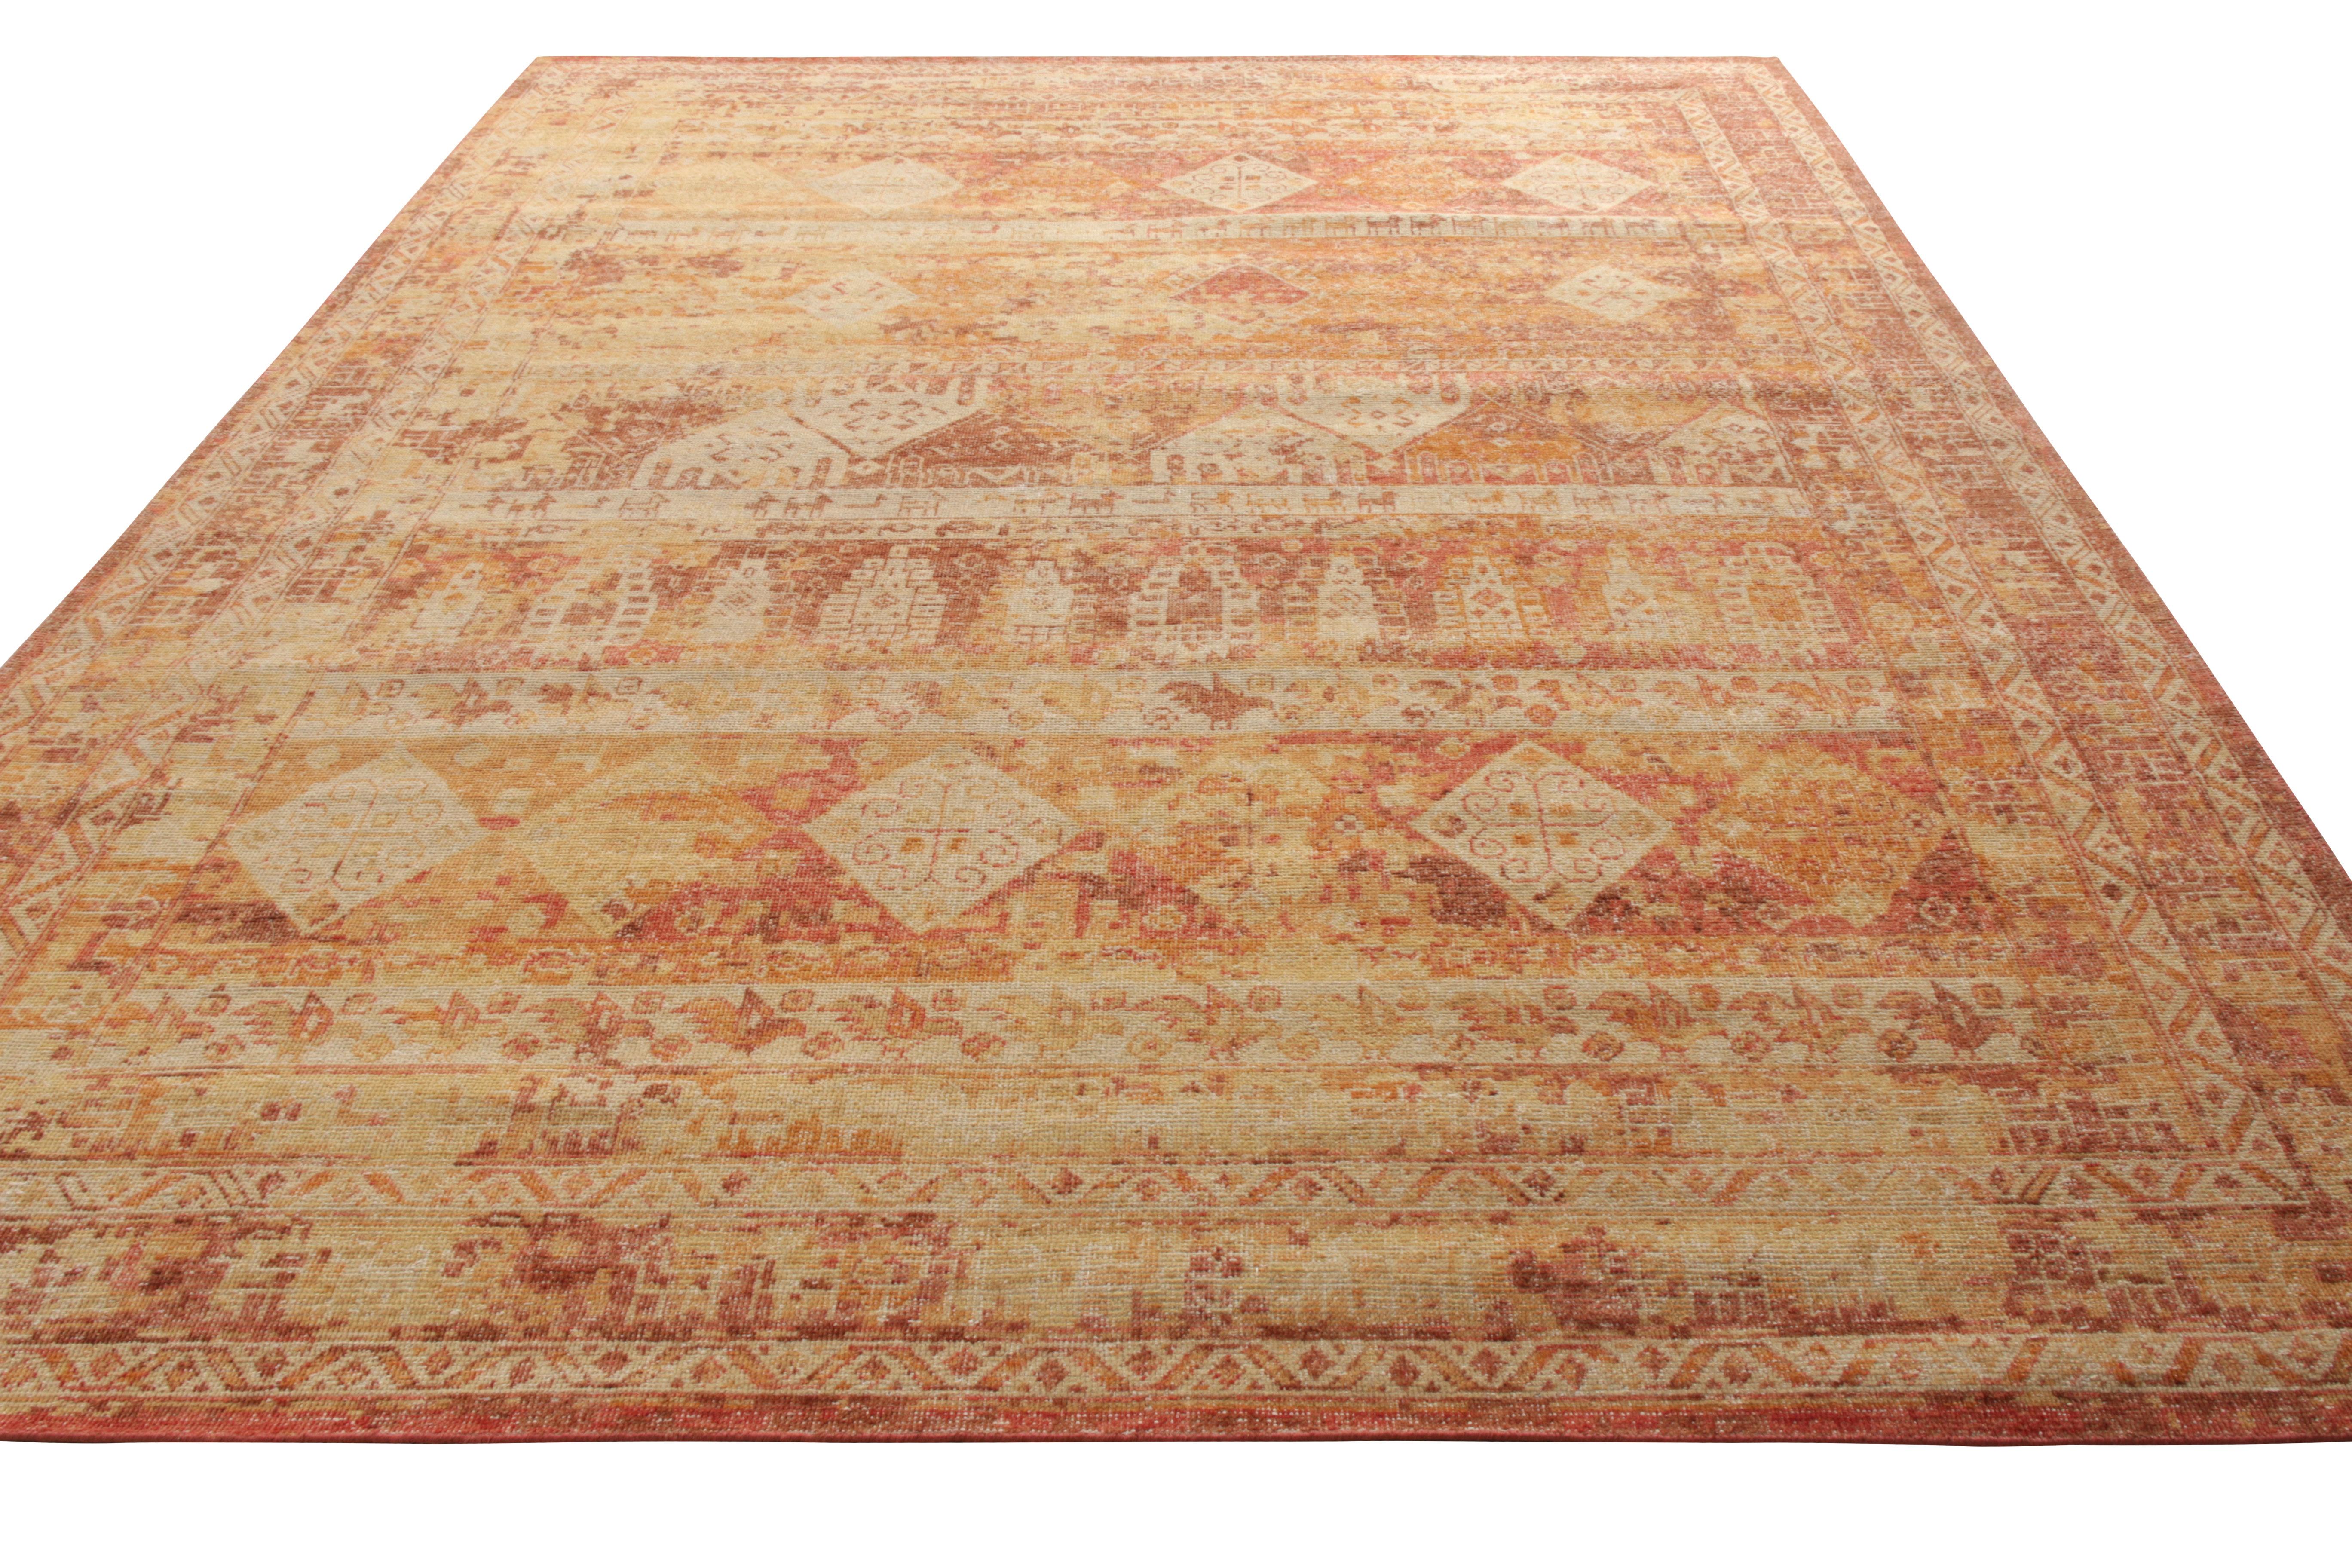 An 9 x 12 ode to celebrated tribal rug styles, from the classic selections in Rug & Kilim’s Homage Collection. Hand knotted in wool, enjoying burnt red and orange geometric pattern transitioning beautifully across the frame for a unique take lending